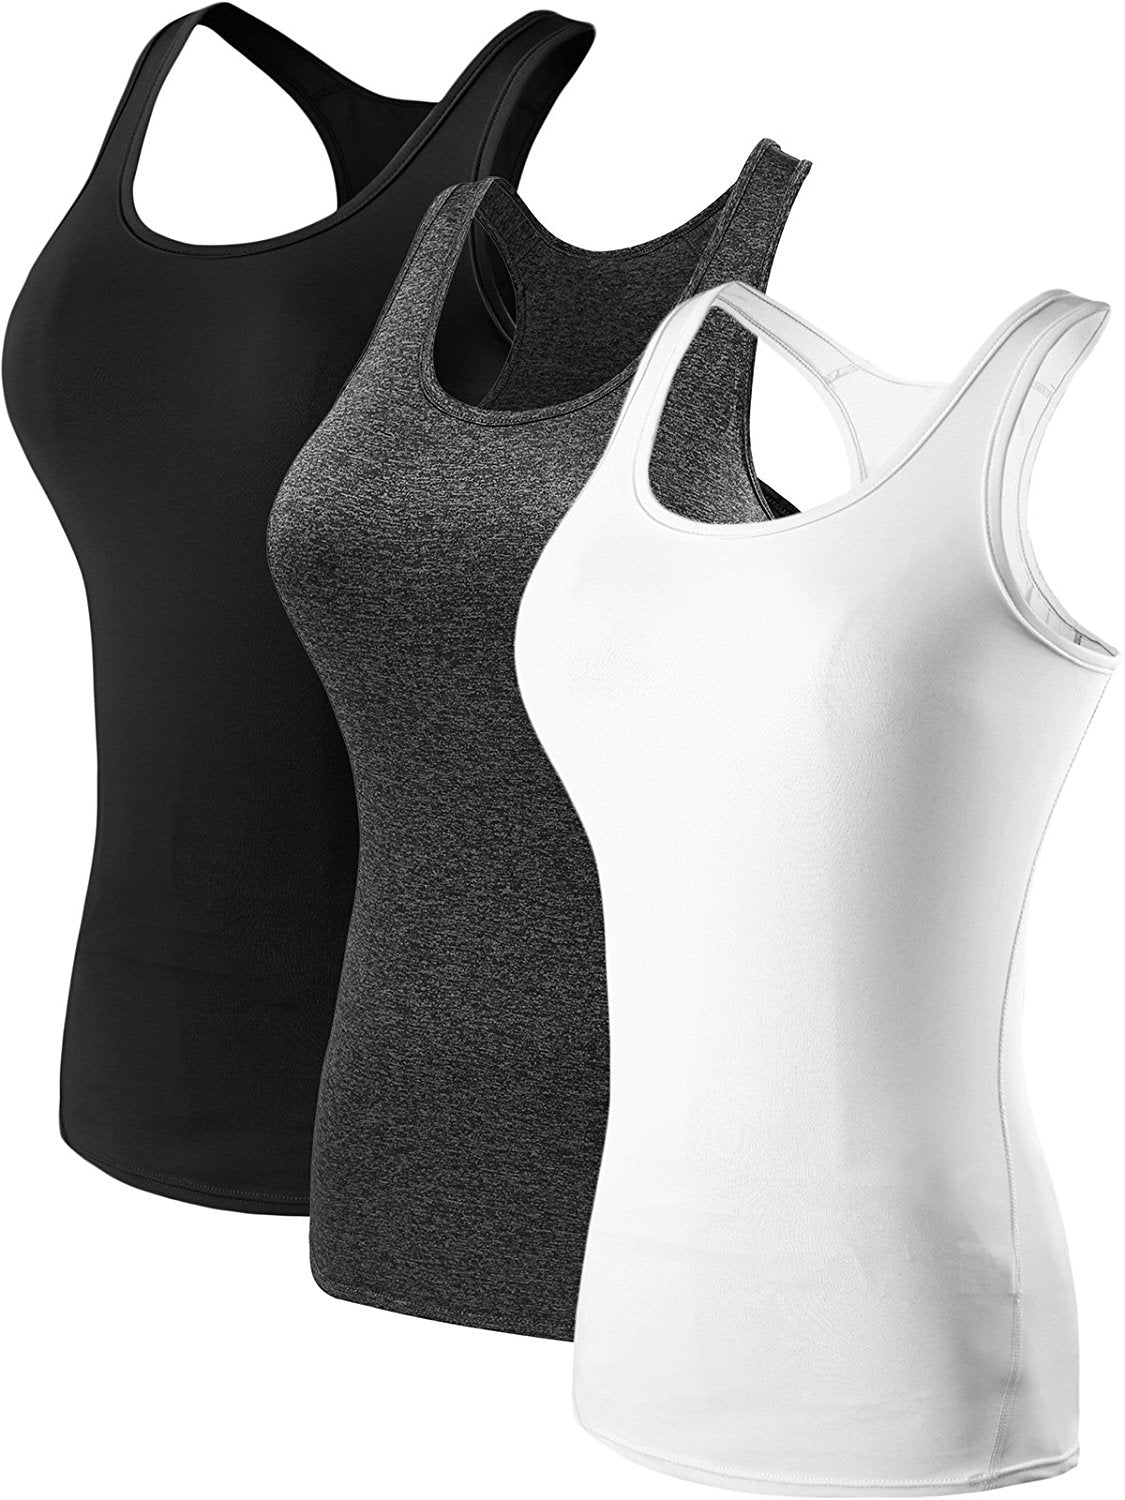 Neleus Women's 3 Pack Compression Base Layer Dry Fit Tank Top - Everyday Crosstrain